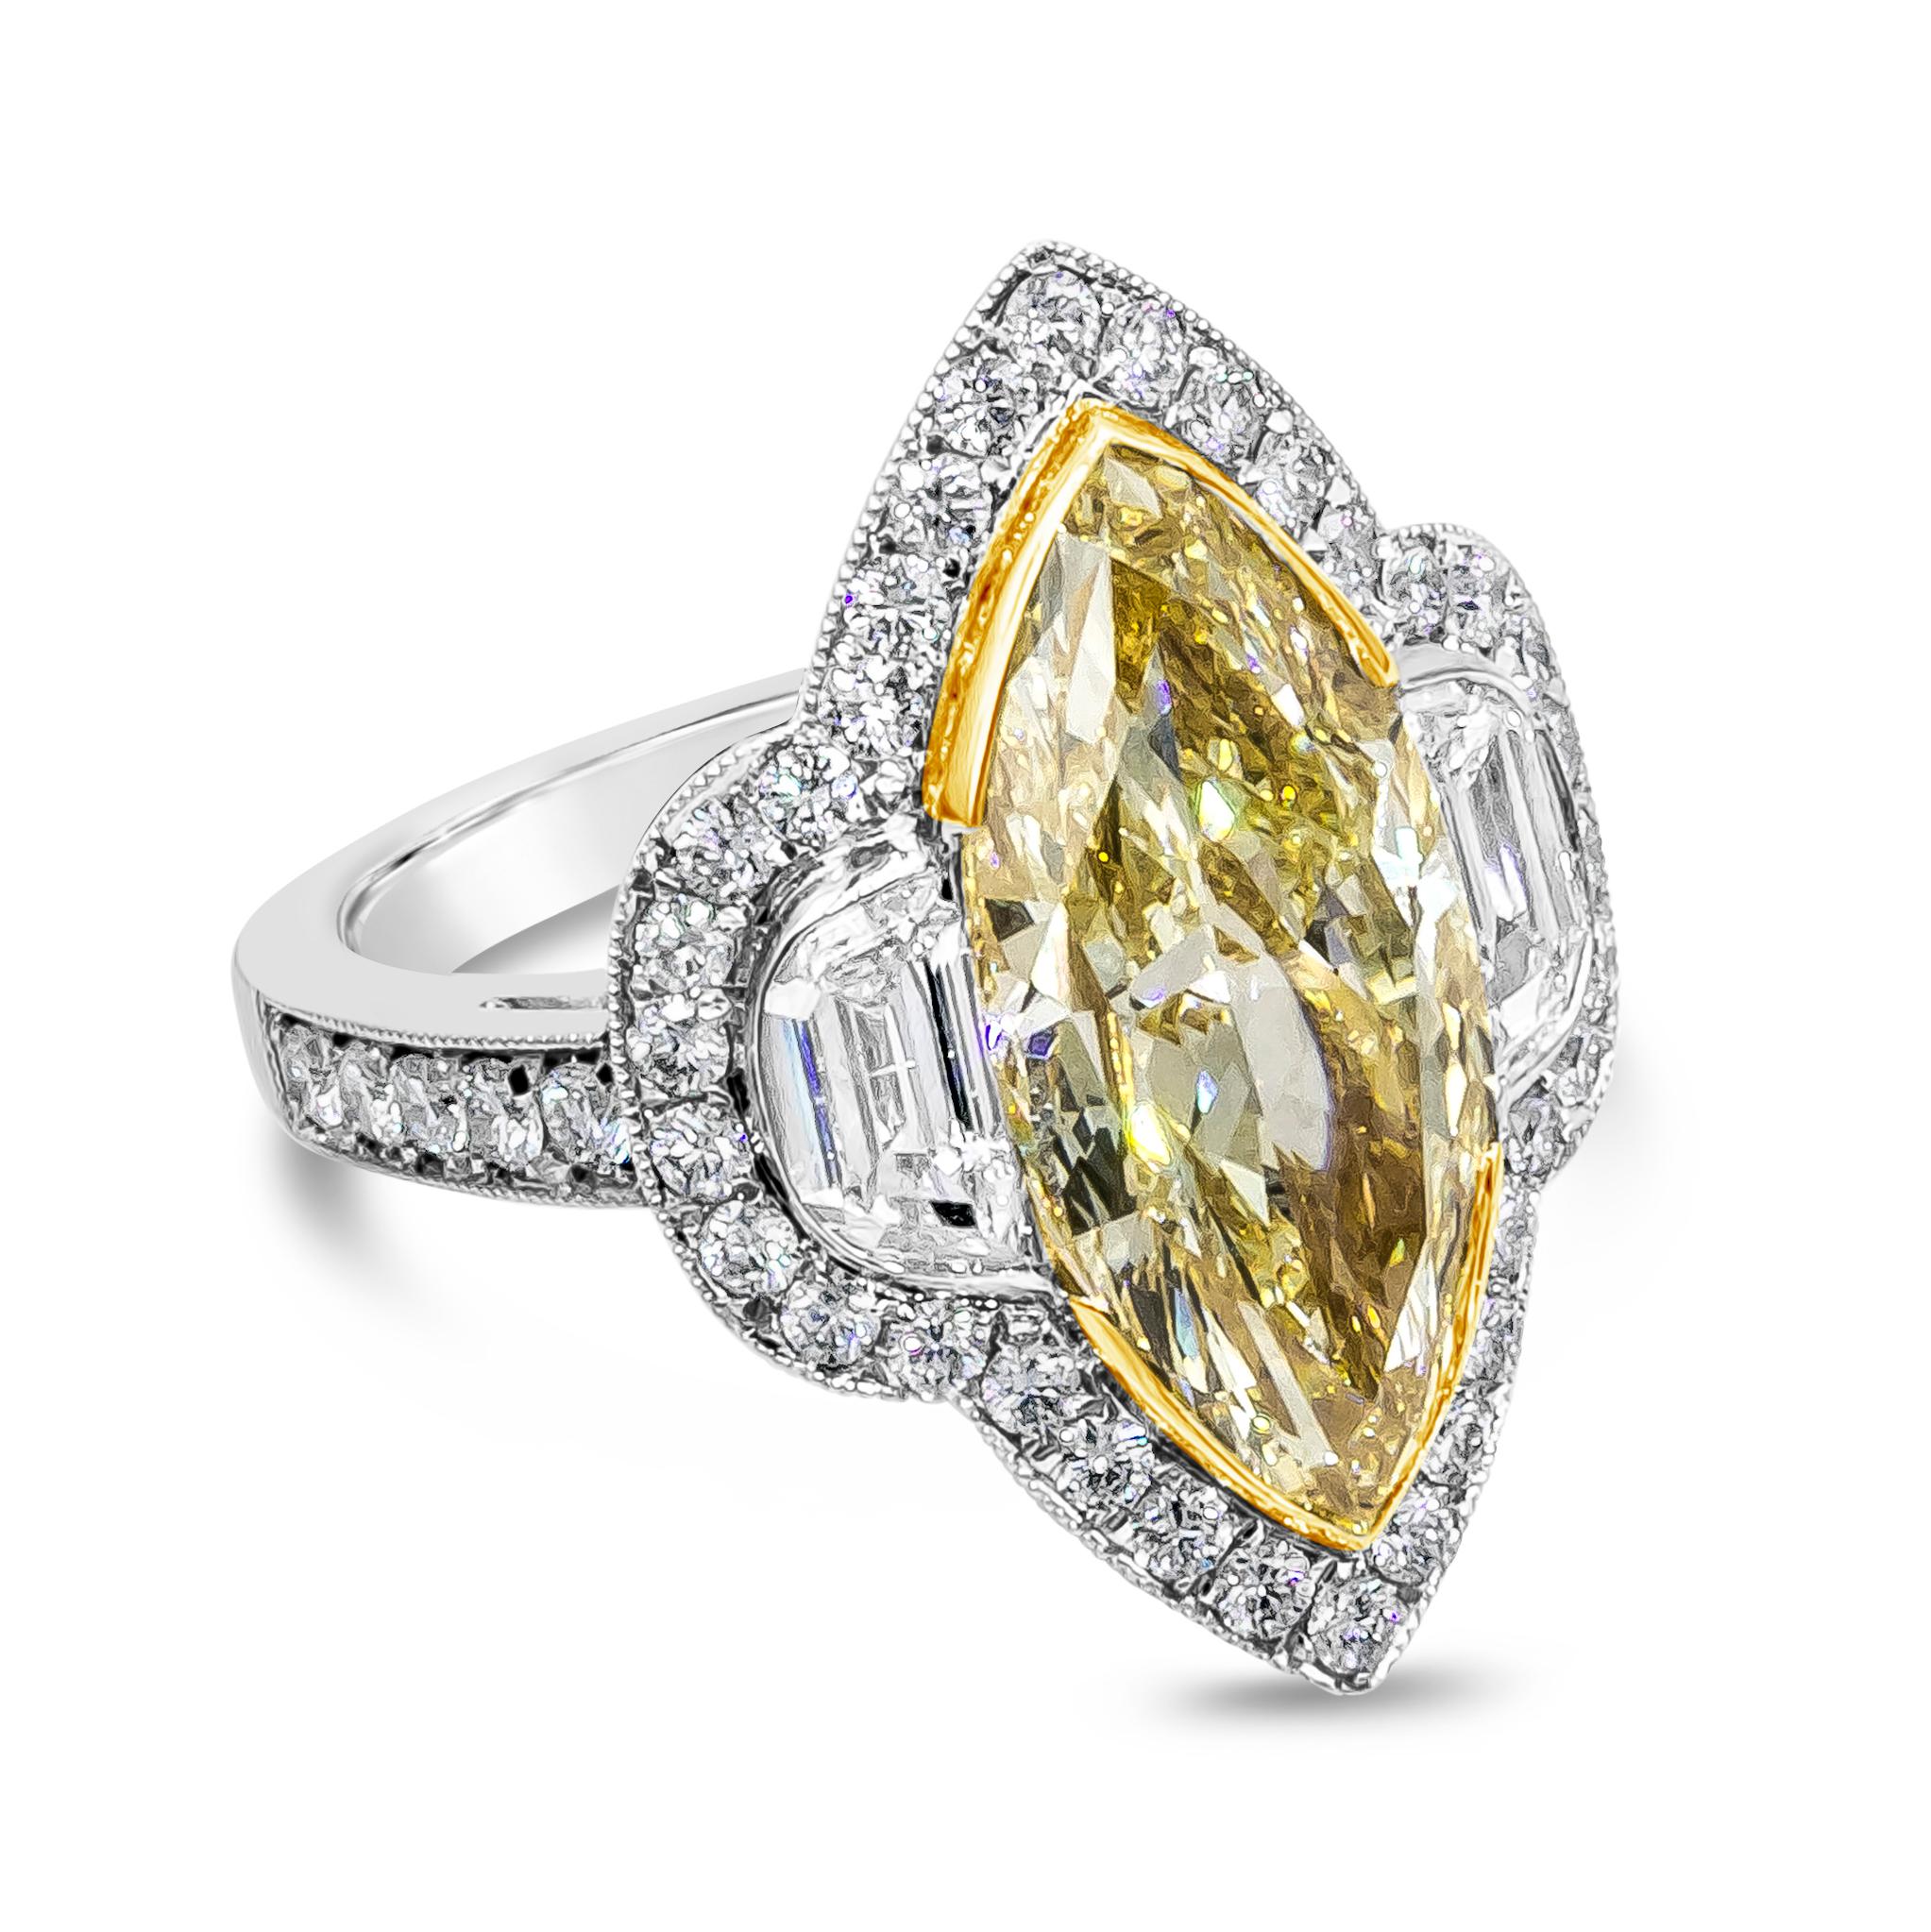 Showcasing a GIA Certified 5.43 carat marquise cut diamond center stone, Fancy Yellow color, VVS1 clarity. Flanking the center diamond is two half moon diamonds weighing 0.79 carats total. Set in an intricately designed setting accented with round